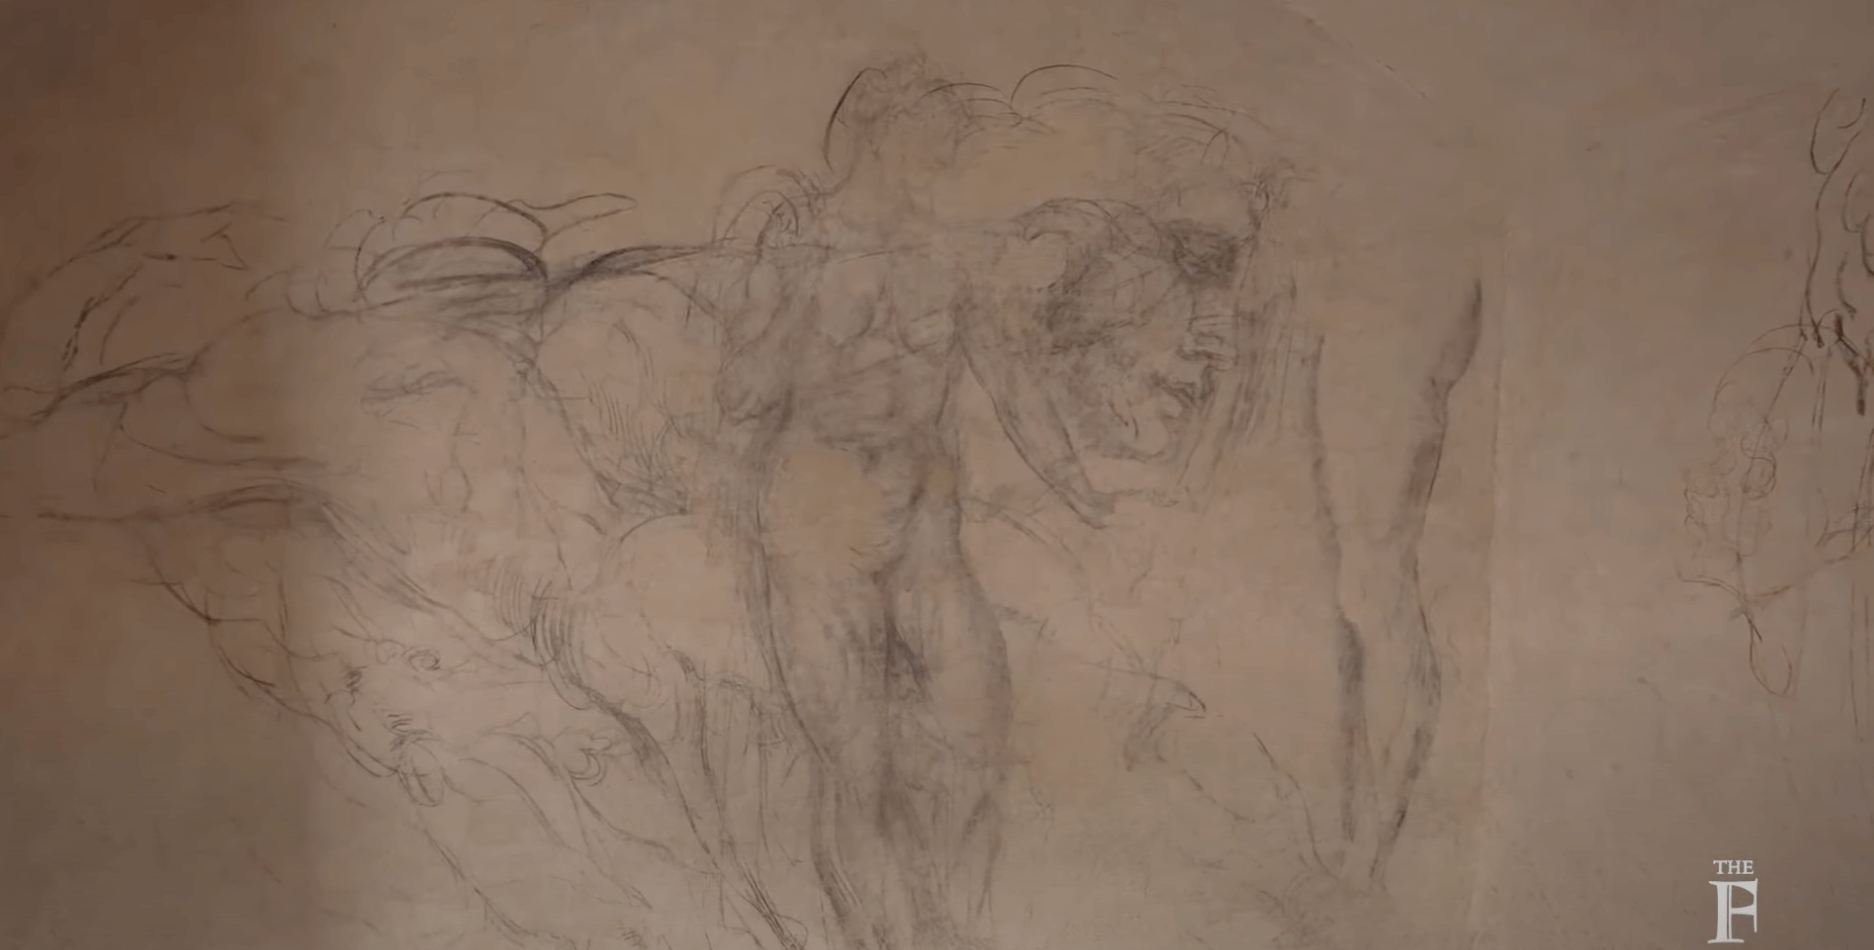 The drawings, discovered in 1975 behind a trapdoor, offer a glimpse into Michelangelo's private world, showcasing sketches reminiscent of his iconic works.